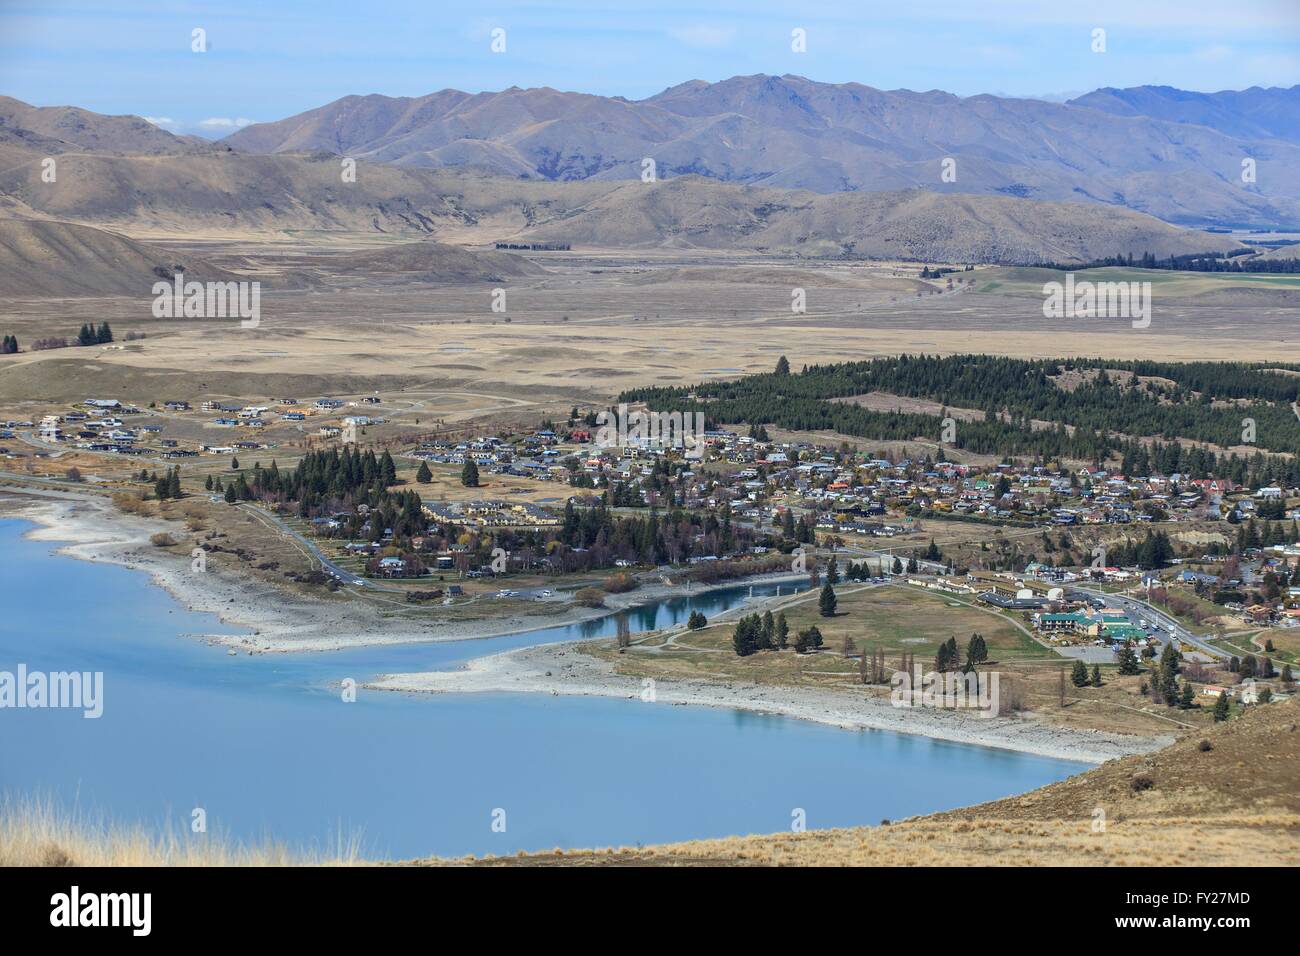 Looking down on the small town of Tekapo from the Mt John Observatory, New Zealand Stock Photo